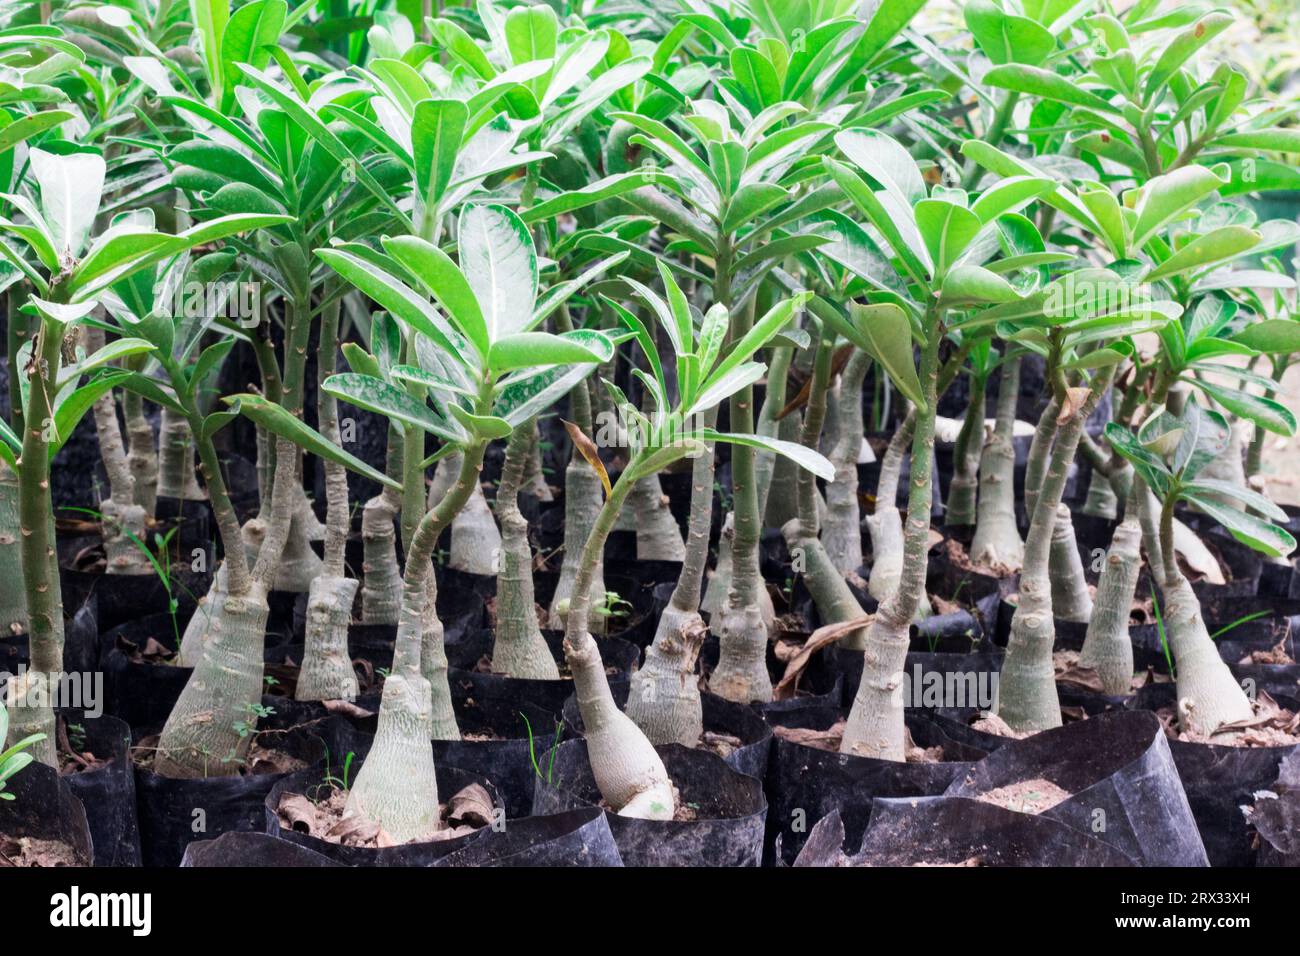 Adenium Obesum Known as Desert Rose growing up in a nursery Stock Photo